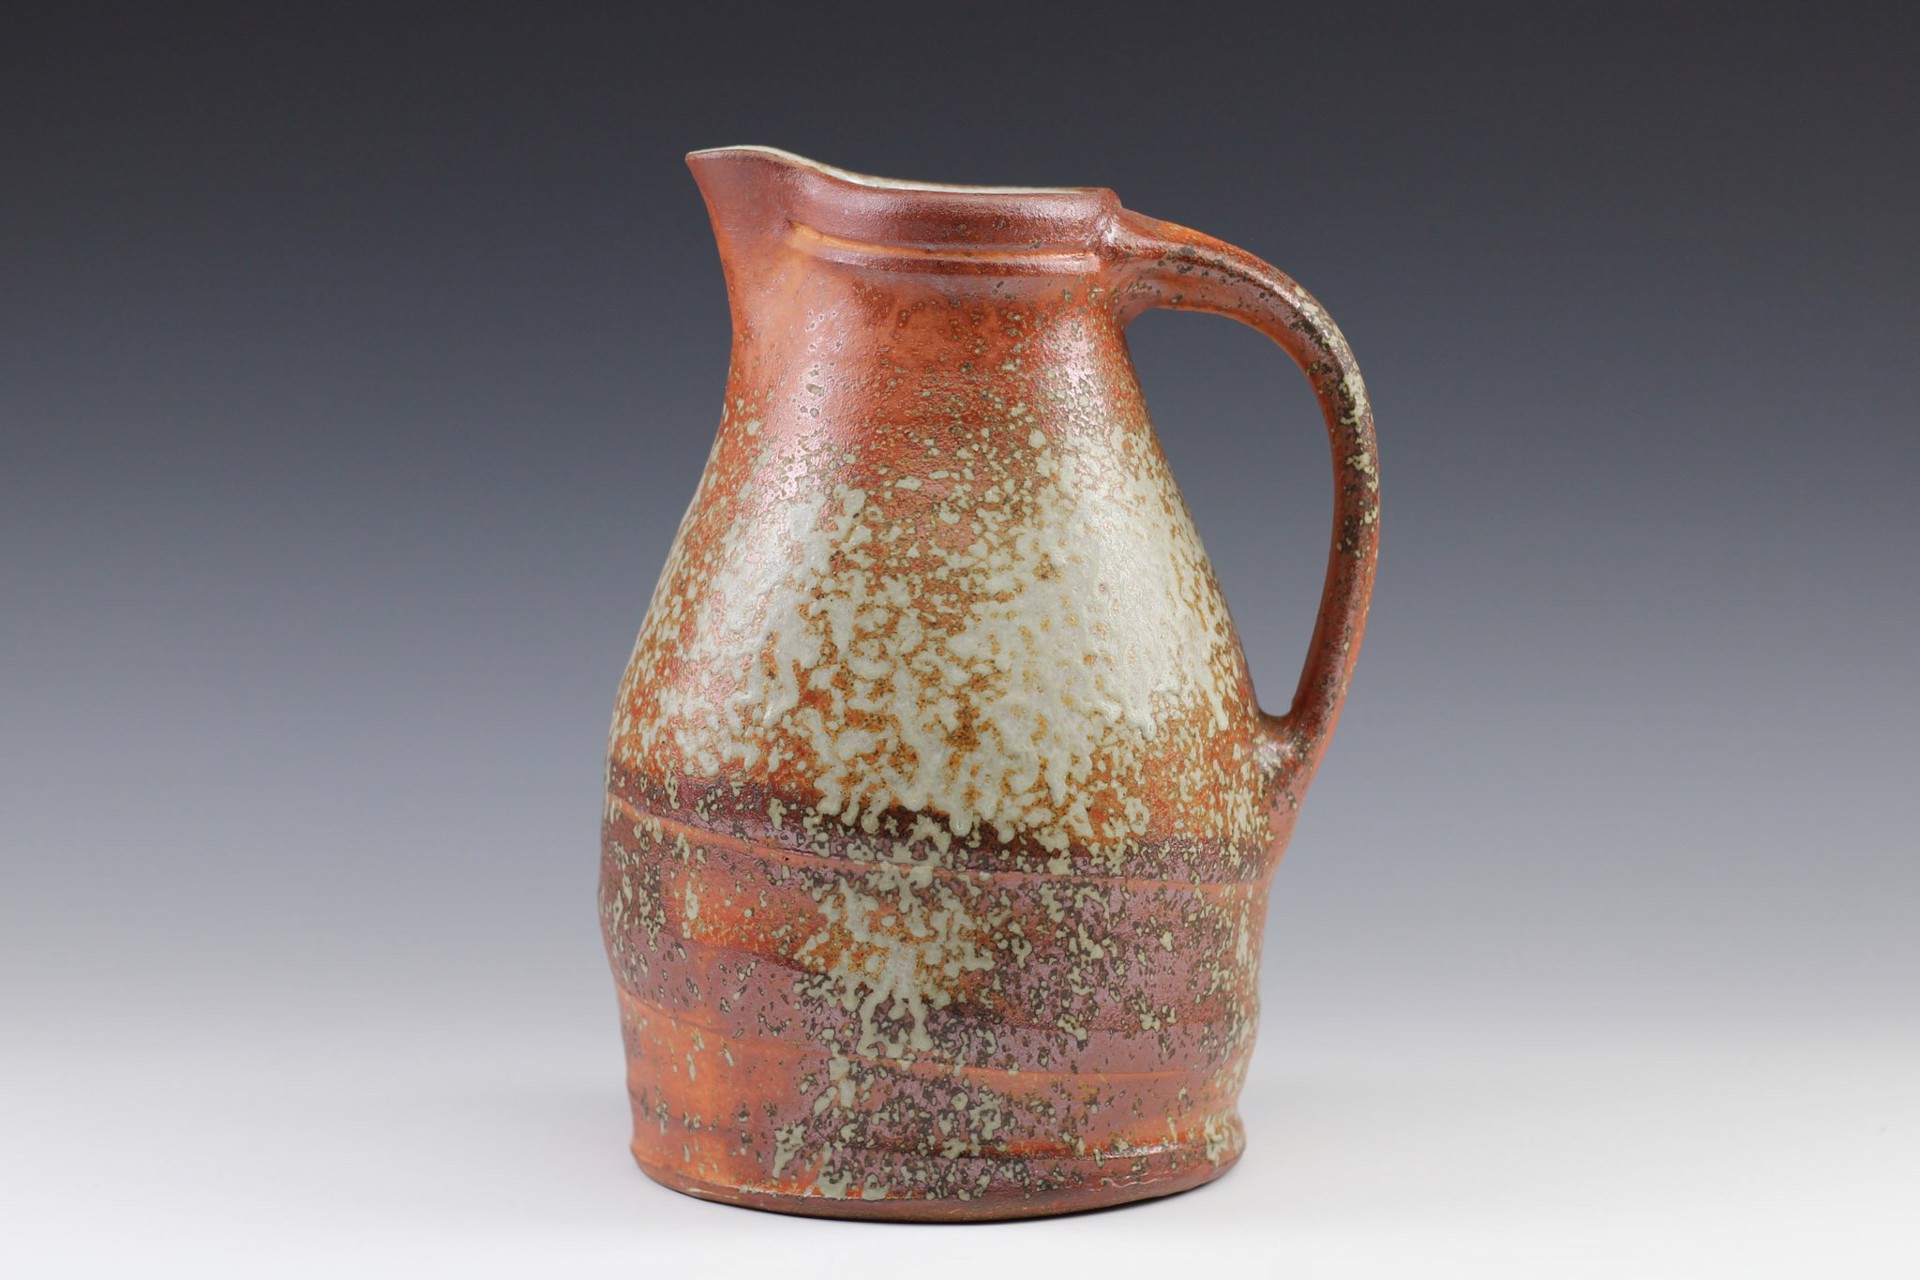 Pitcher by George Lowe